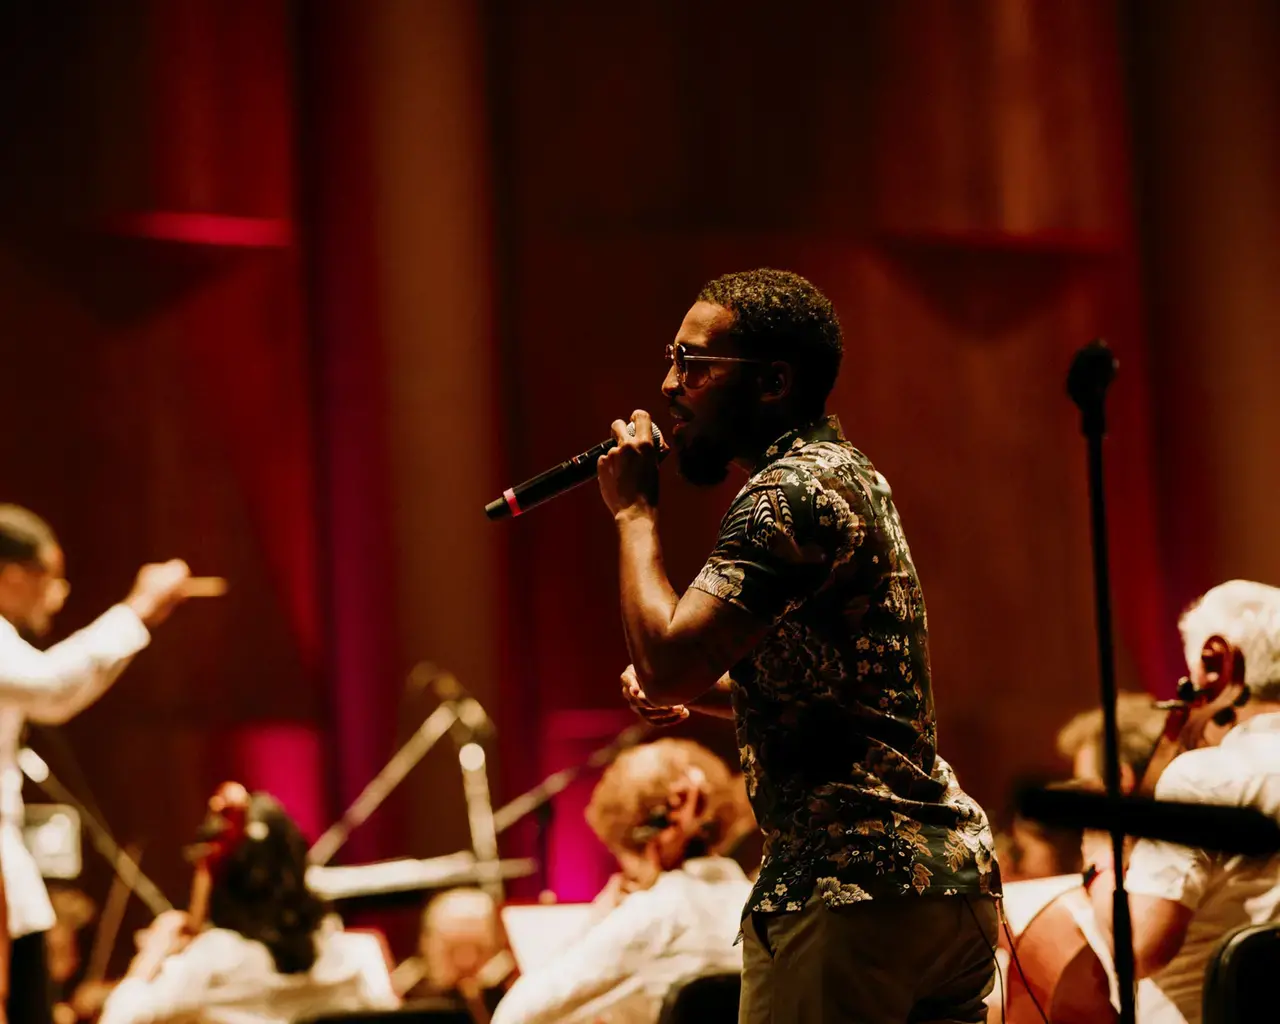 Rapper Chill Moody performs with The Philadelphia Orchestra for Darin Atwater’s "Black Metropolis" at the Mann Center.